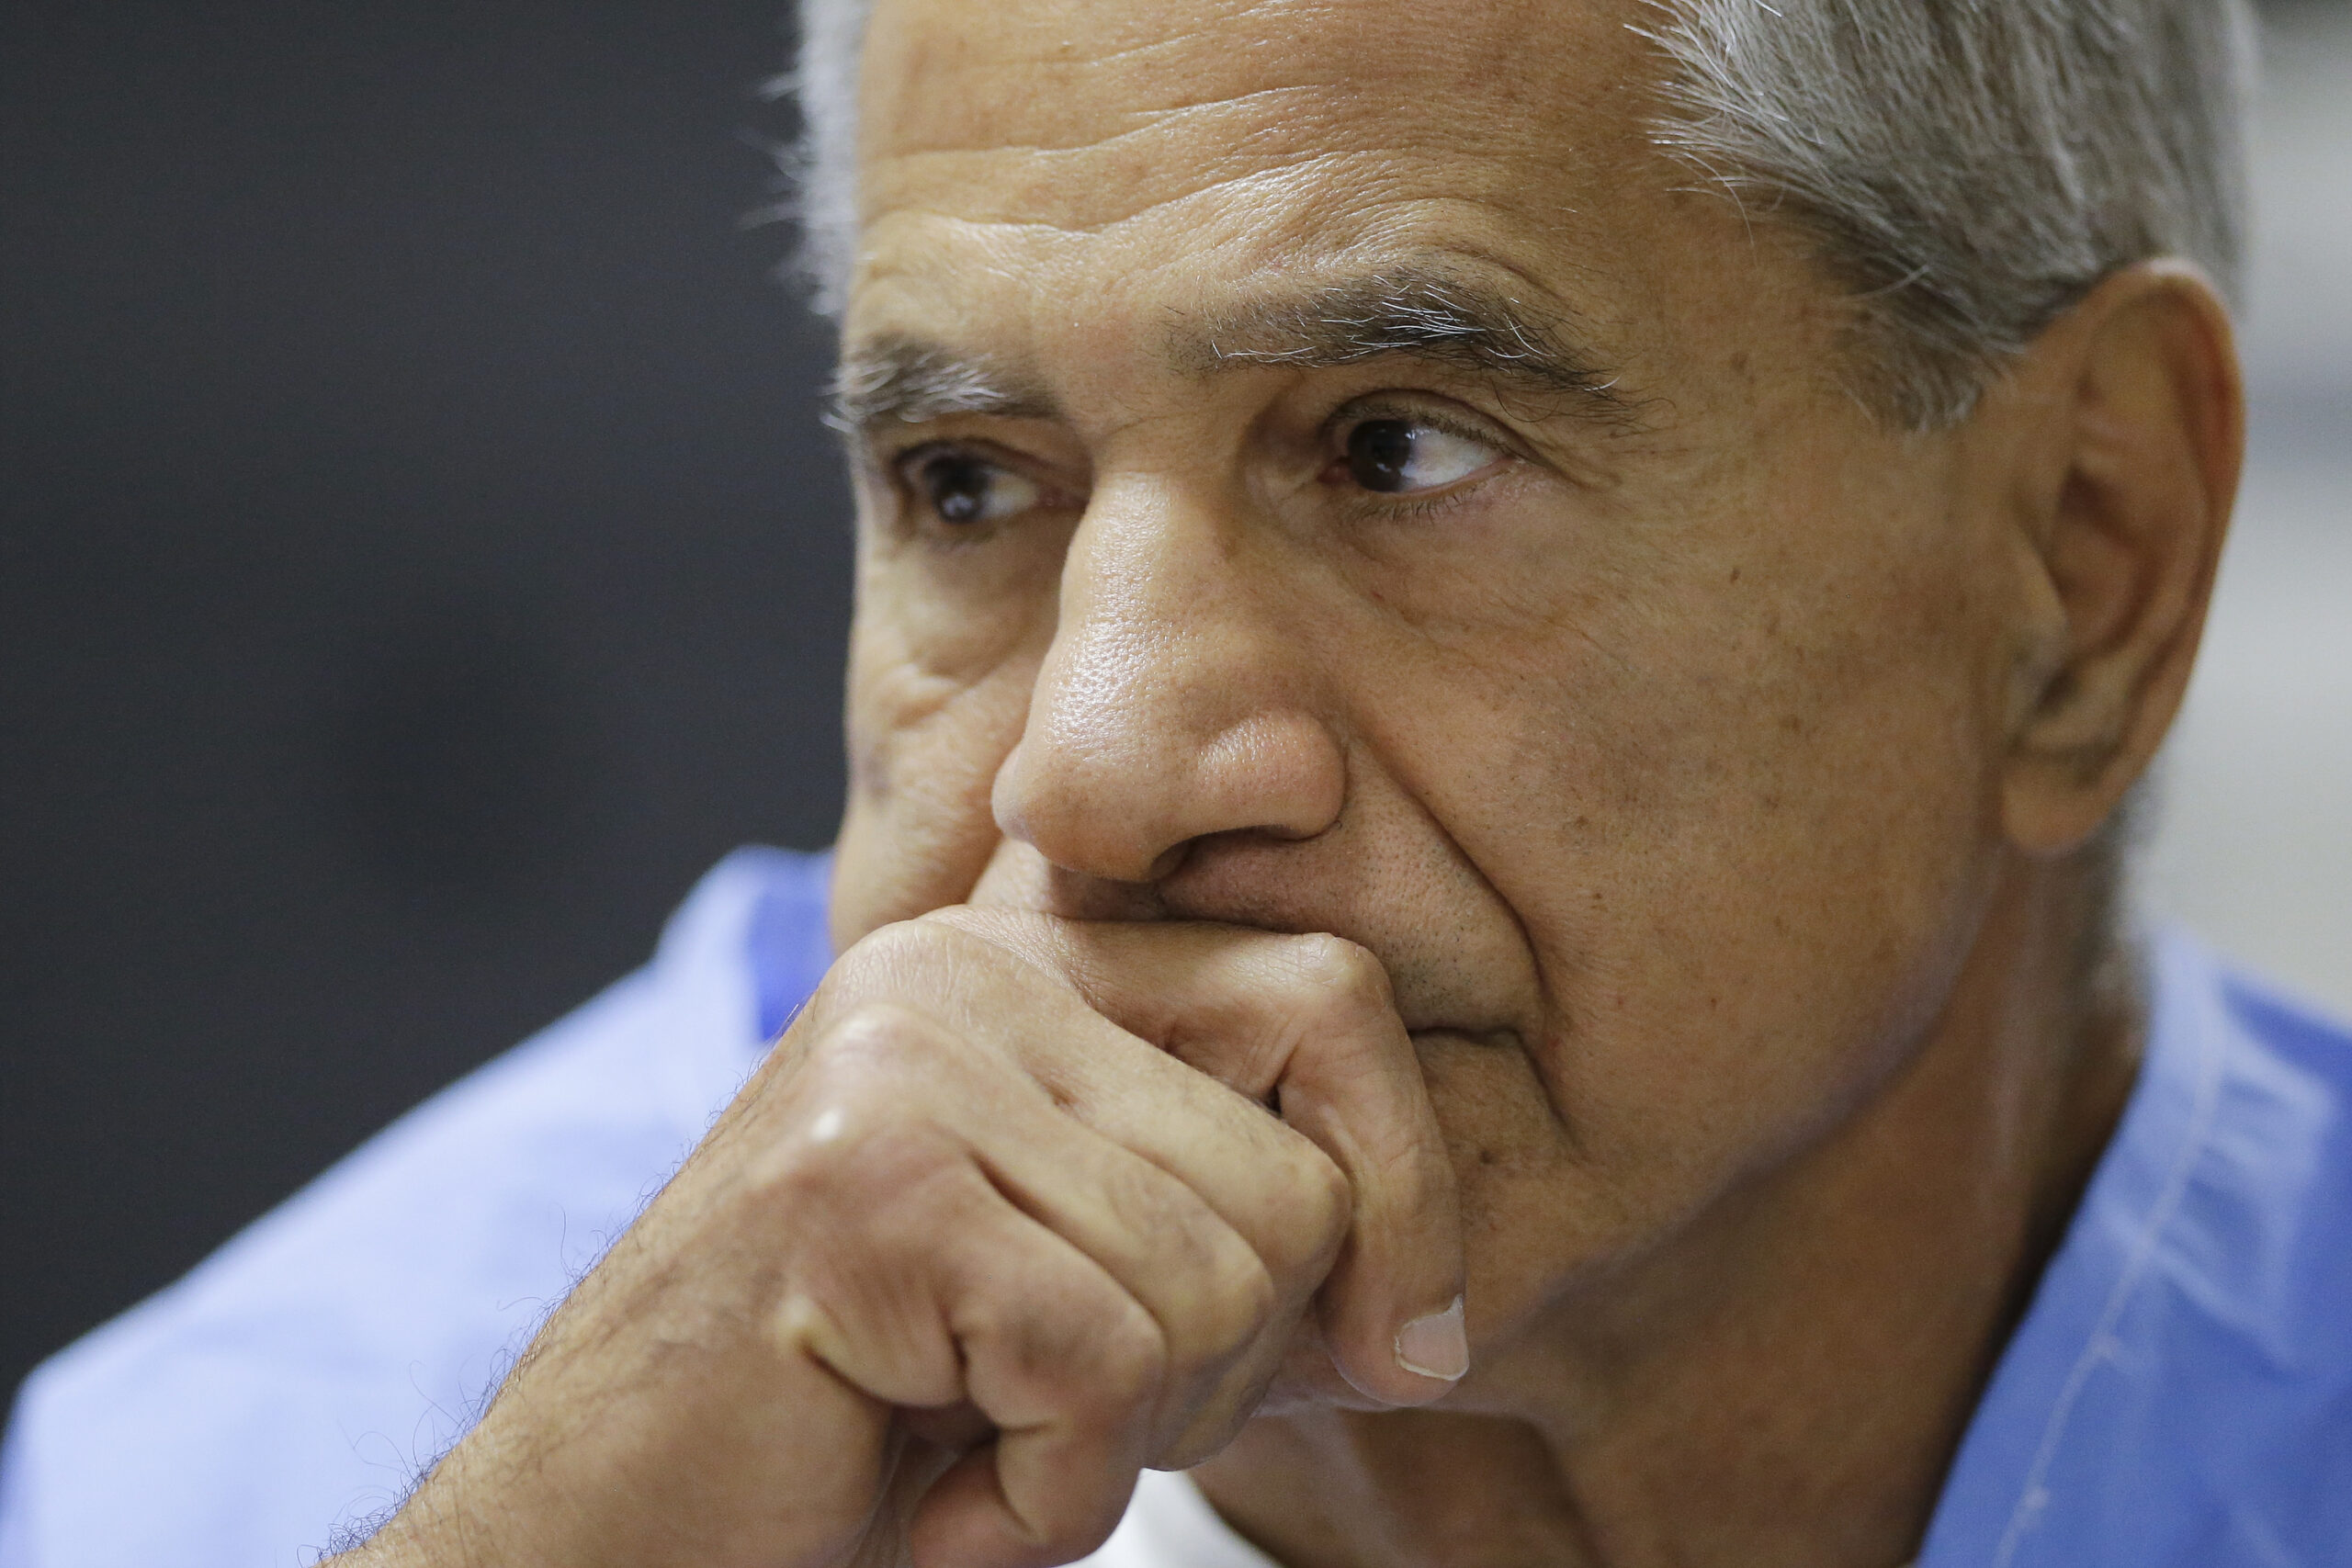 FILE - Sirhan Sirhan reacts during a parole hearing on Feb. 10, 2016, at the Richard J. Donovan Correctional Facility in San Diego. California Gov. Gavin Newsom on Thursday, Jan. 13, 2022, rejected releasing Robert F. Kennedy assassin Sirhan Sirhan from prison more than a half-century after the 1968 slaying left a deep wound during one of America’s darkest times. (AP Photo/Gregory Bull, Pool, File)